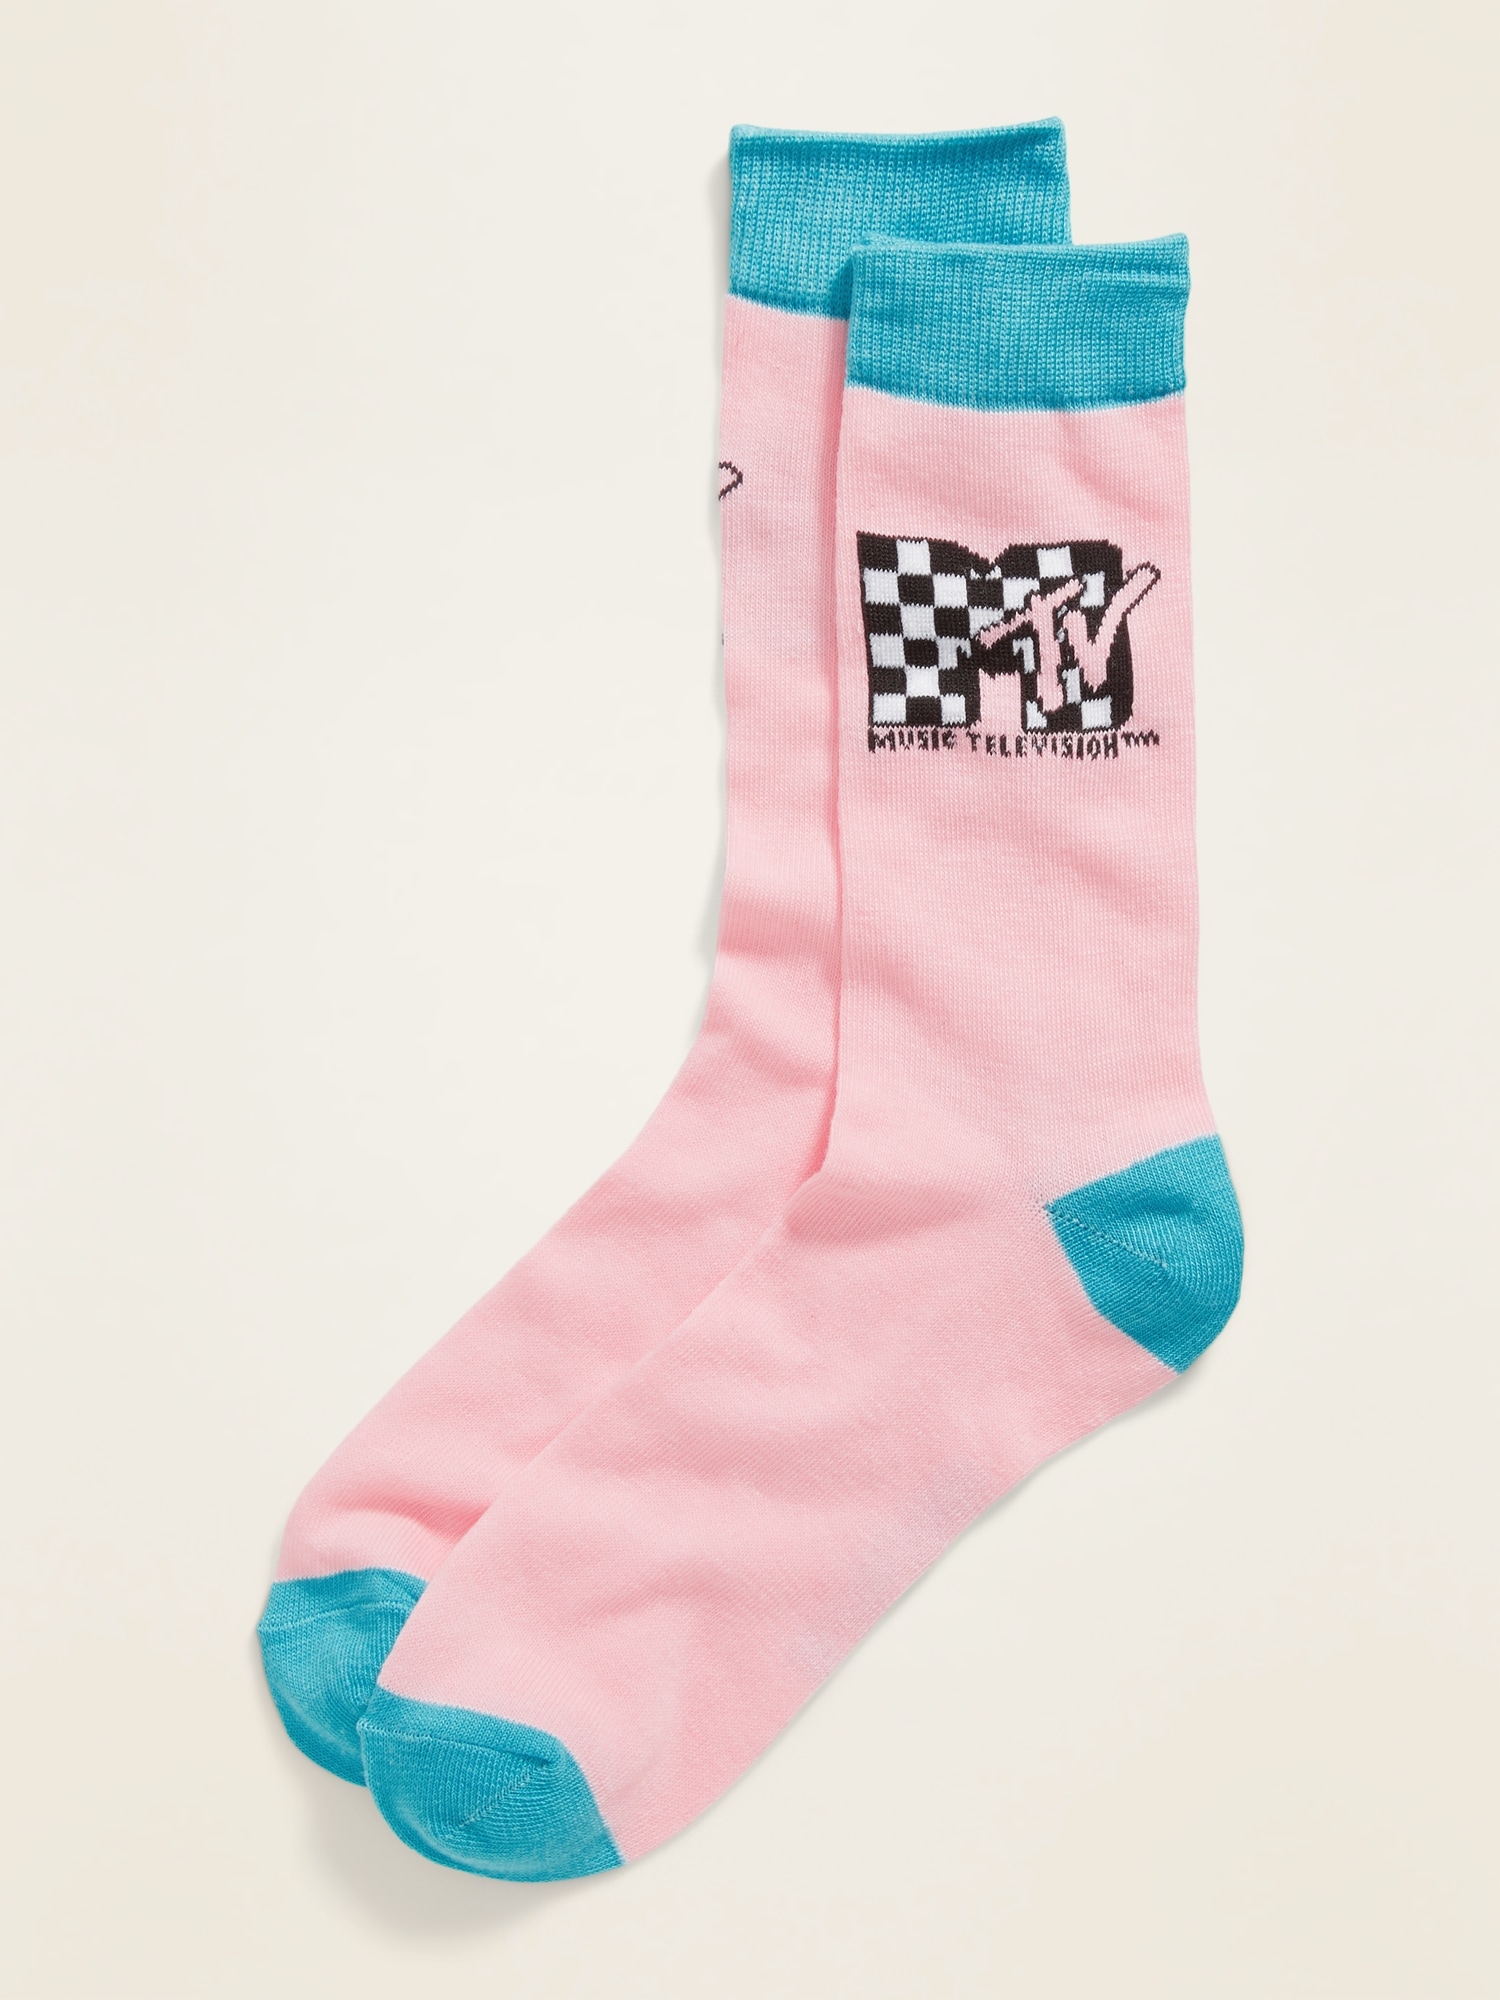 Licensed Pop-Culture Graphic Socks for Adults | Old Navy